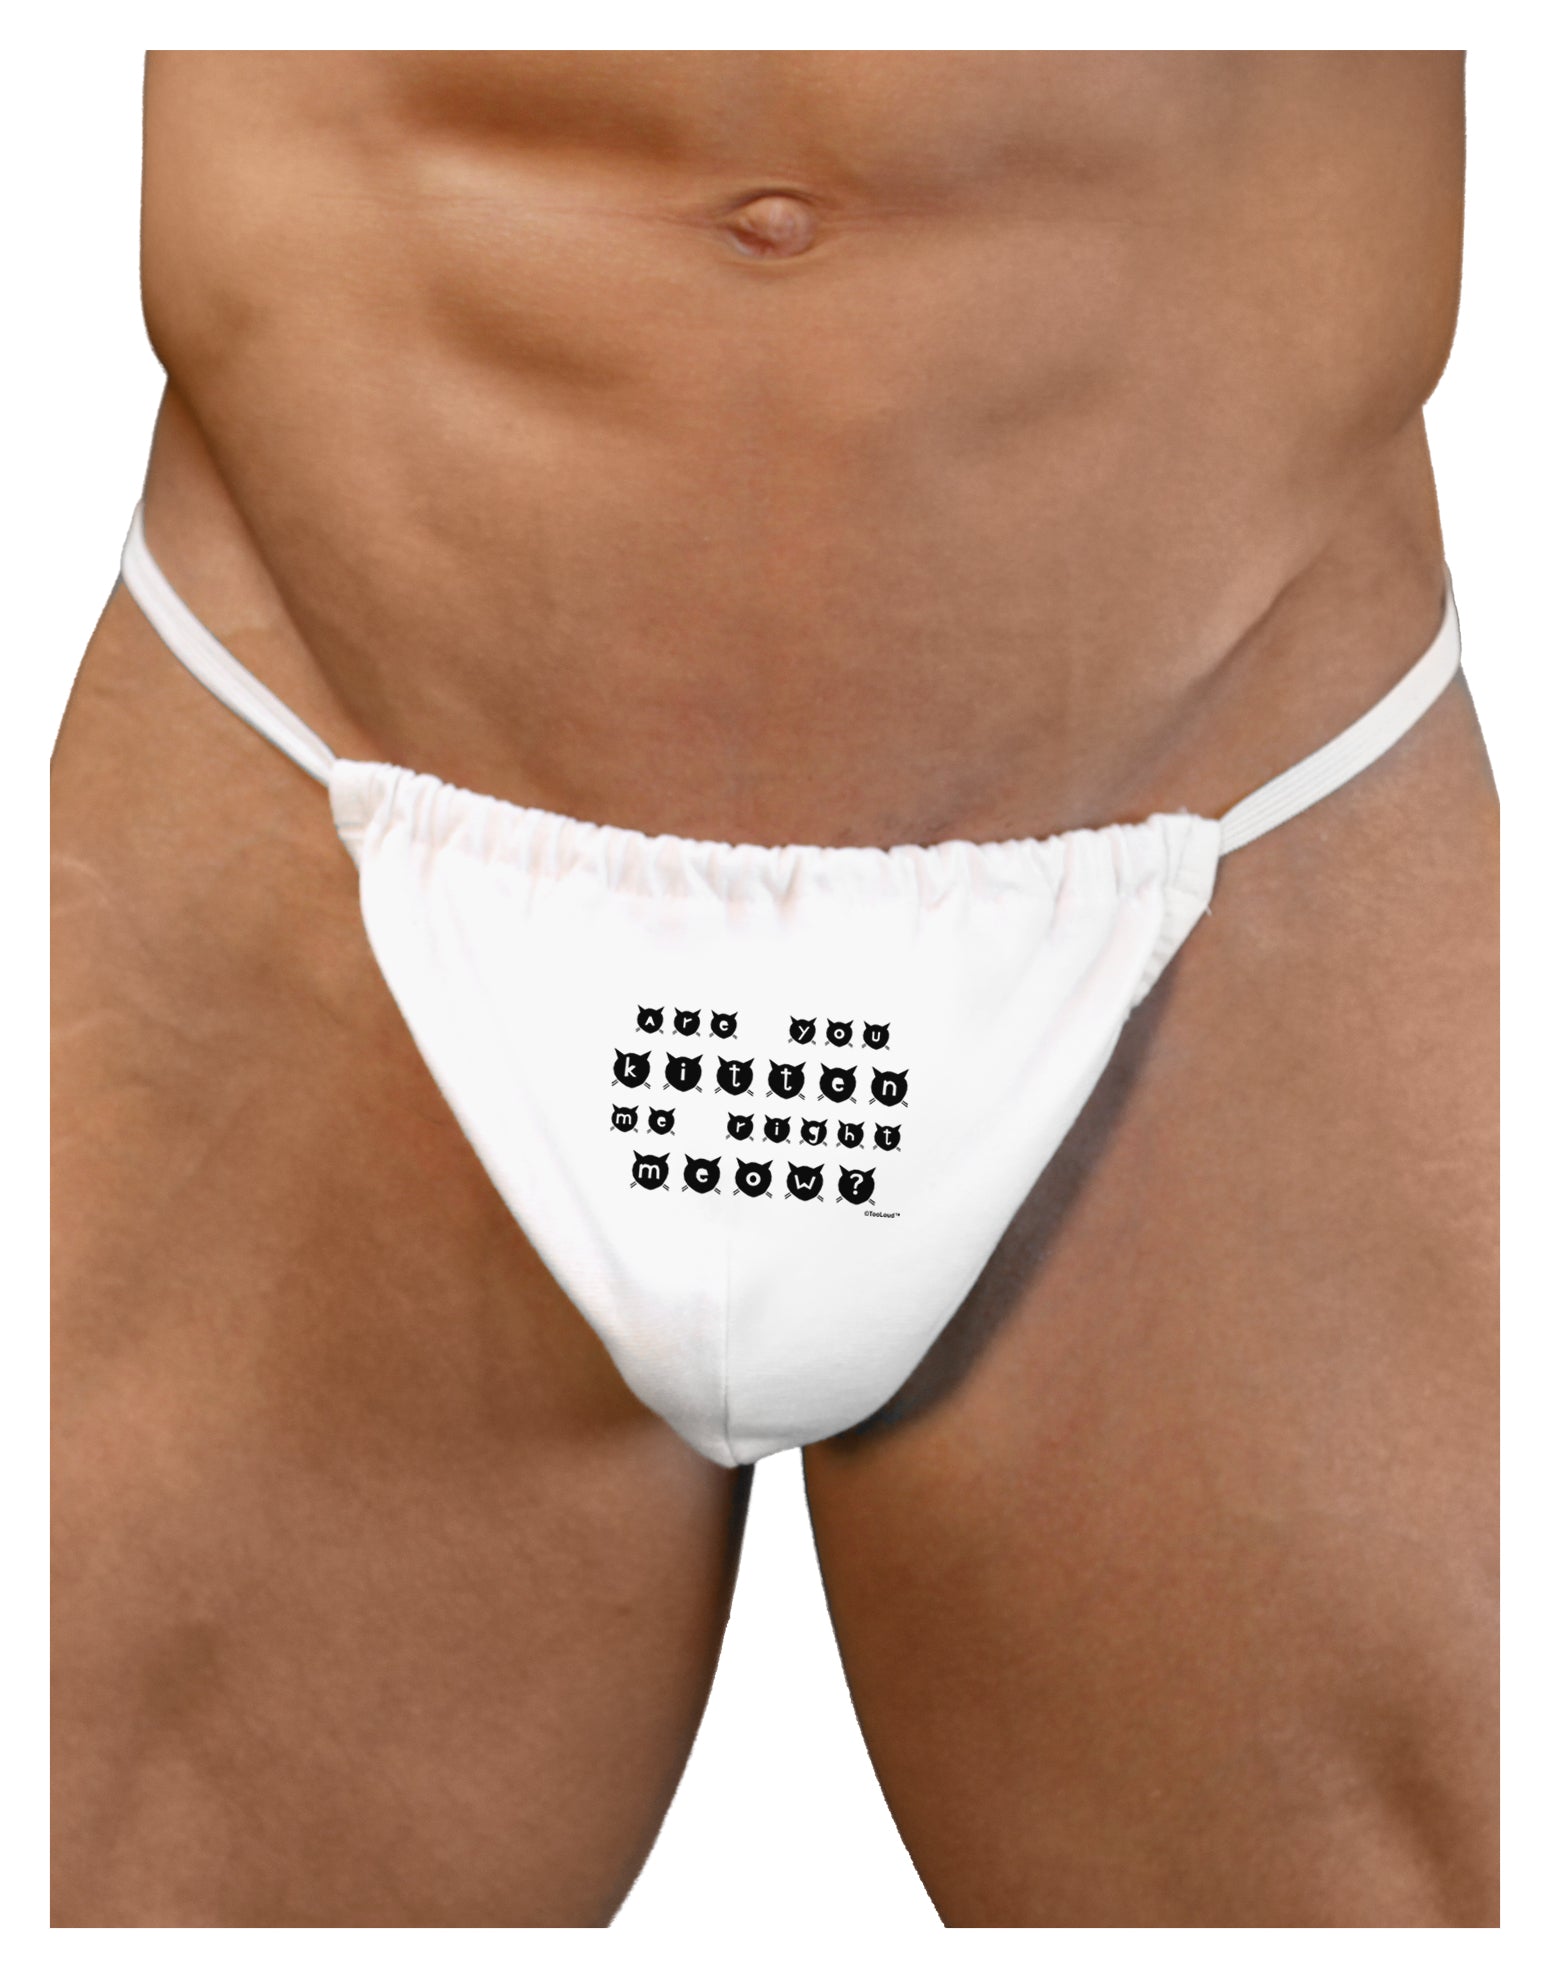 Are You Kitten Me Right Meow Cats Mens G-String Underwear - Davson